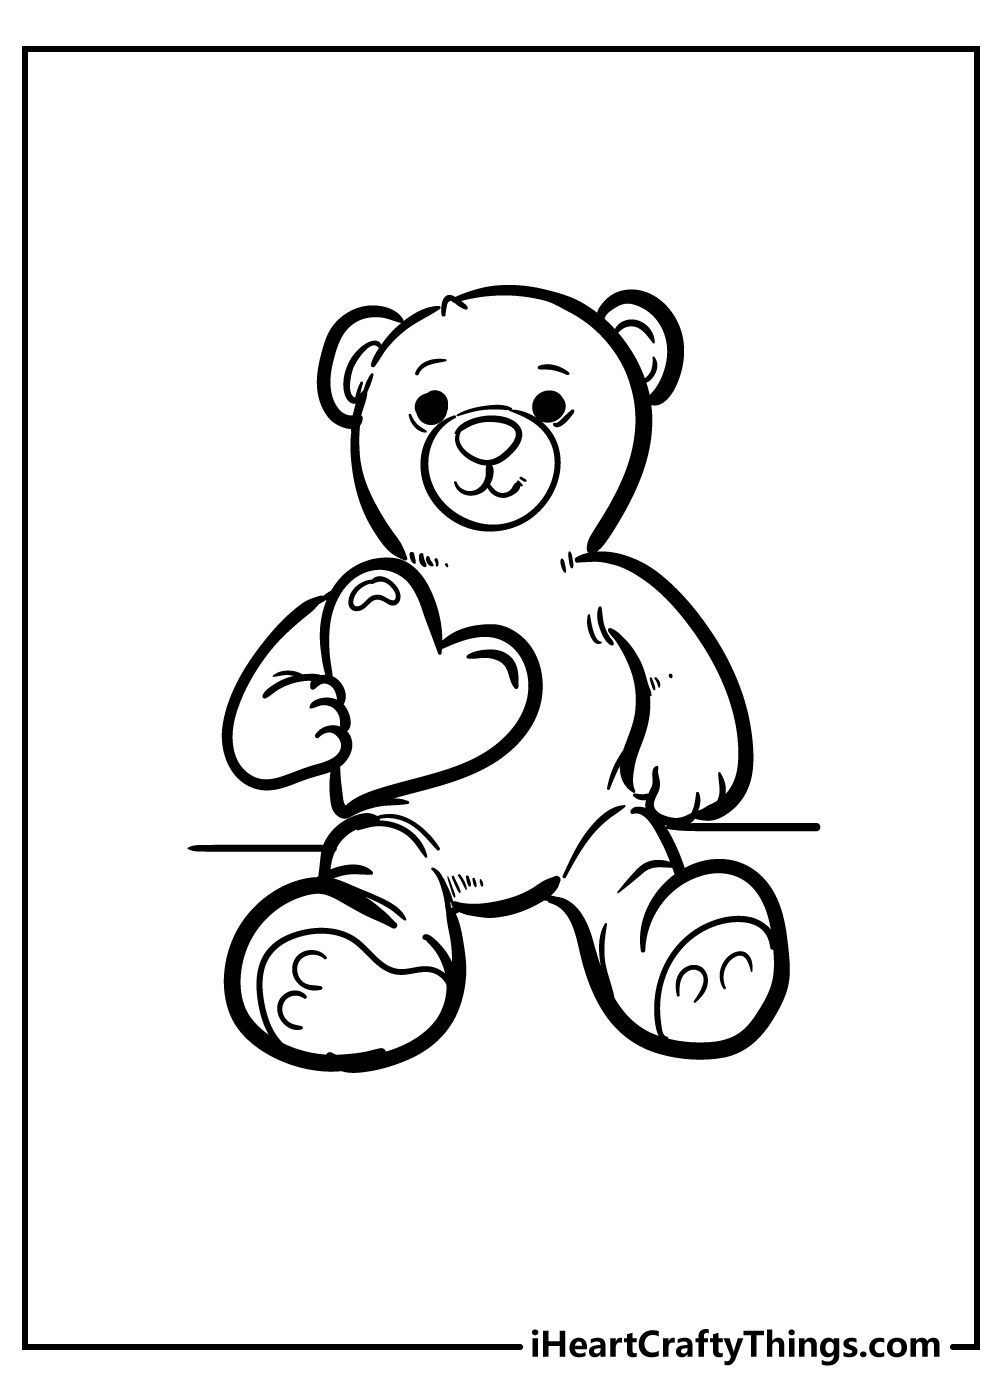 Teddy Bear Coloring Book for kids free printable